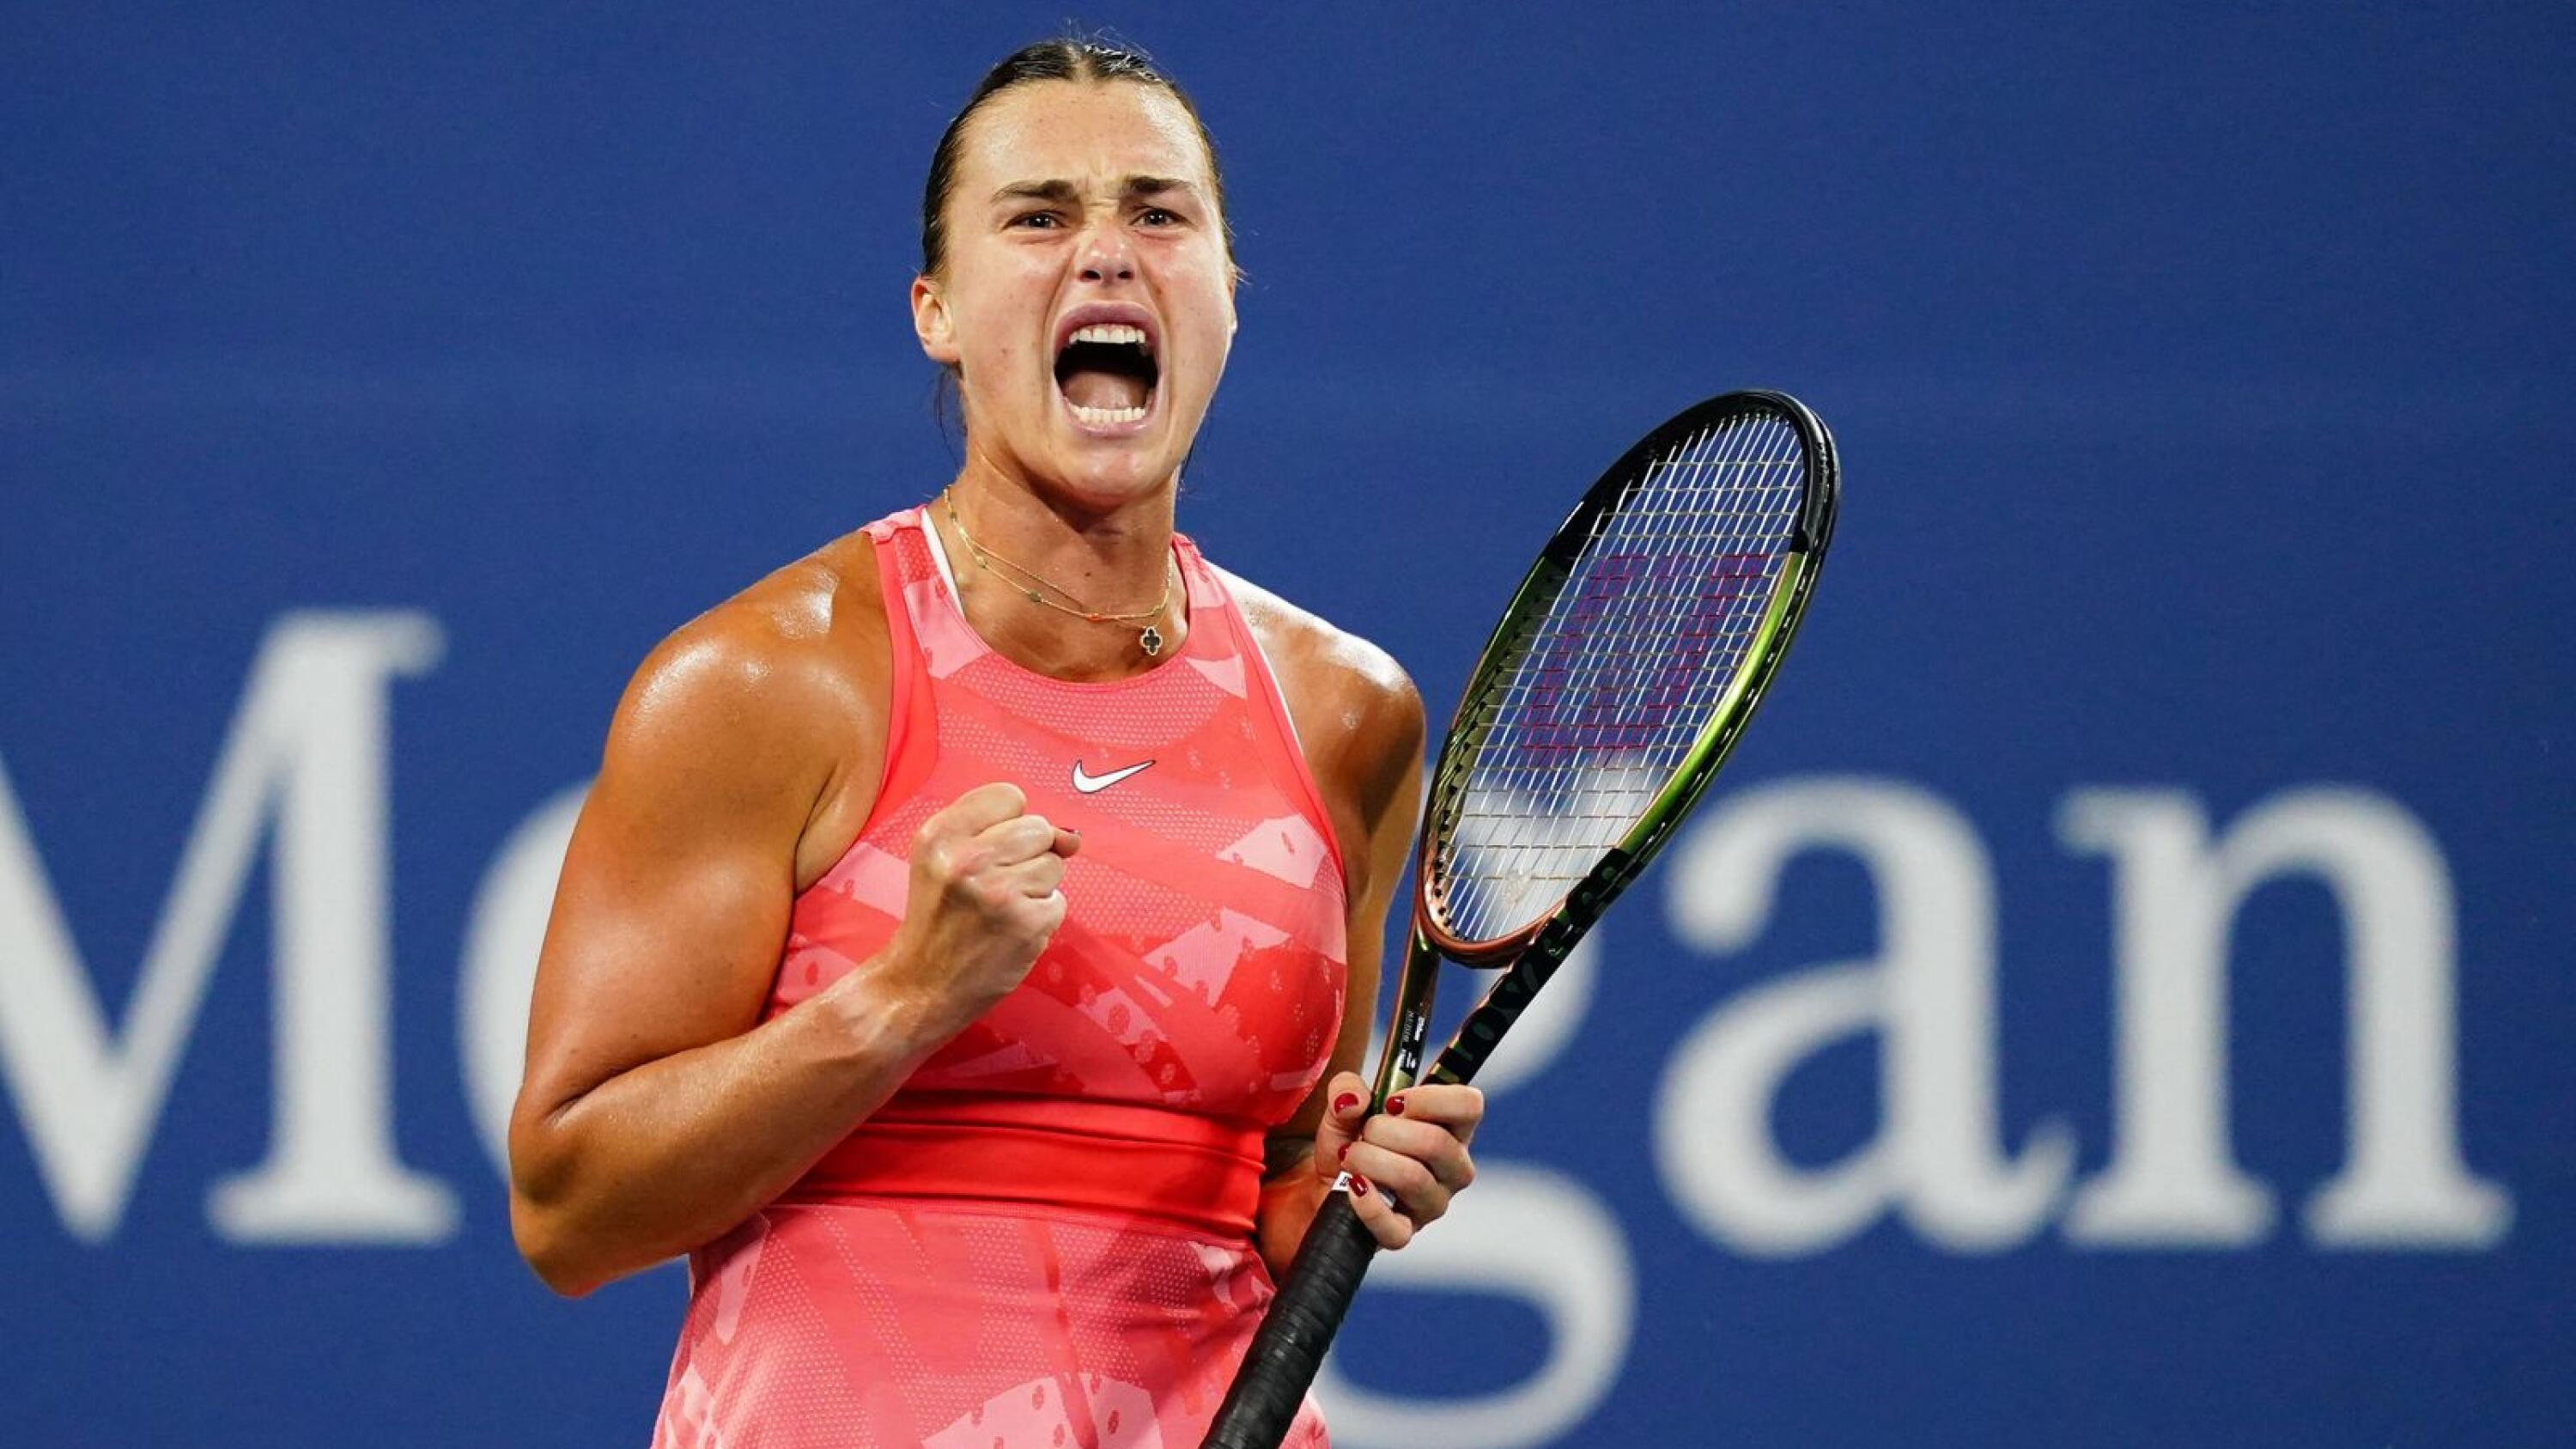 Aryna Sabalenka in action at the US Open tennis tournament